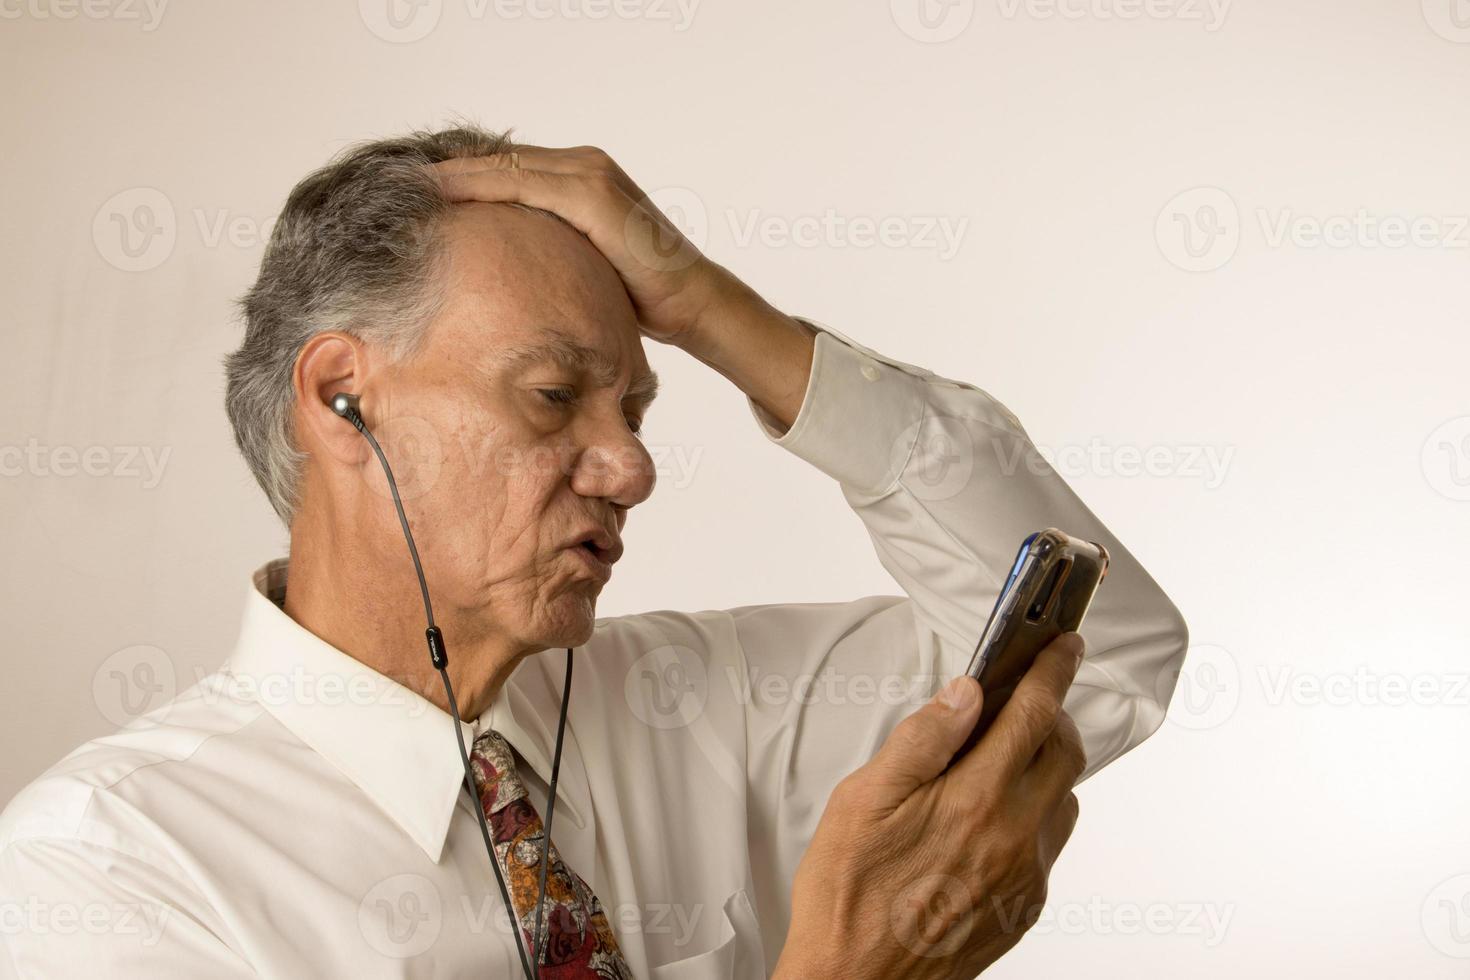 Older Man listening to music or a podcast using ear buds on his smartphone photo